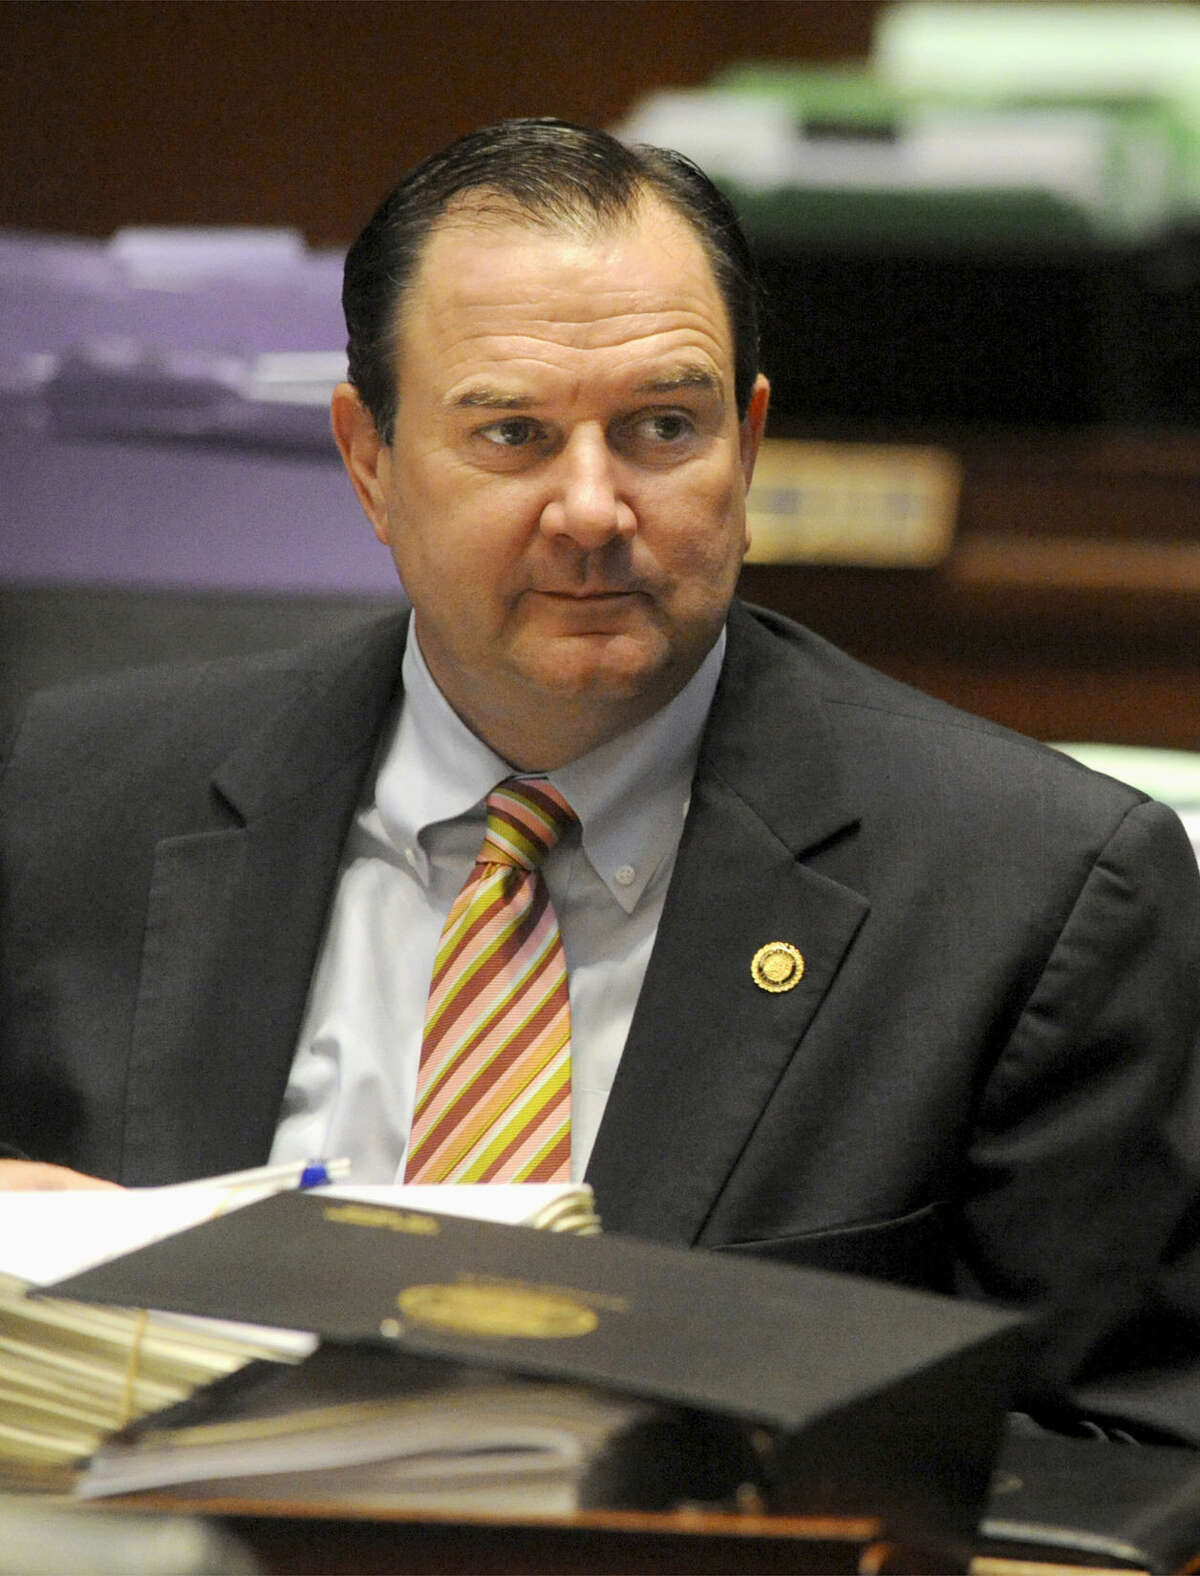 FILE - In this May 2, 2011, file photo, Sen. Mike Kehoe, R-Jefferson City, listens to colleagues debate at the Missouri Capitol in Jefferson City. Kehoe backed a Missouri law, which took effect in 2016, cutting the maximum length of time that people can receive unemployment benefits to as few as 13 weeks. (AP Photo/Kelley McCall, File)